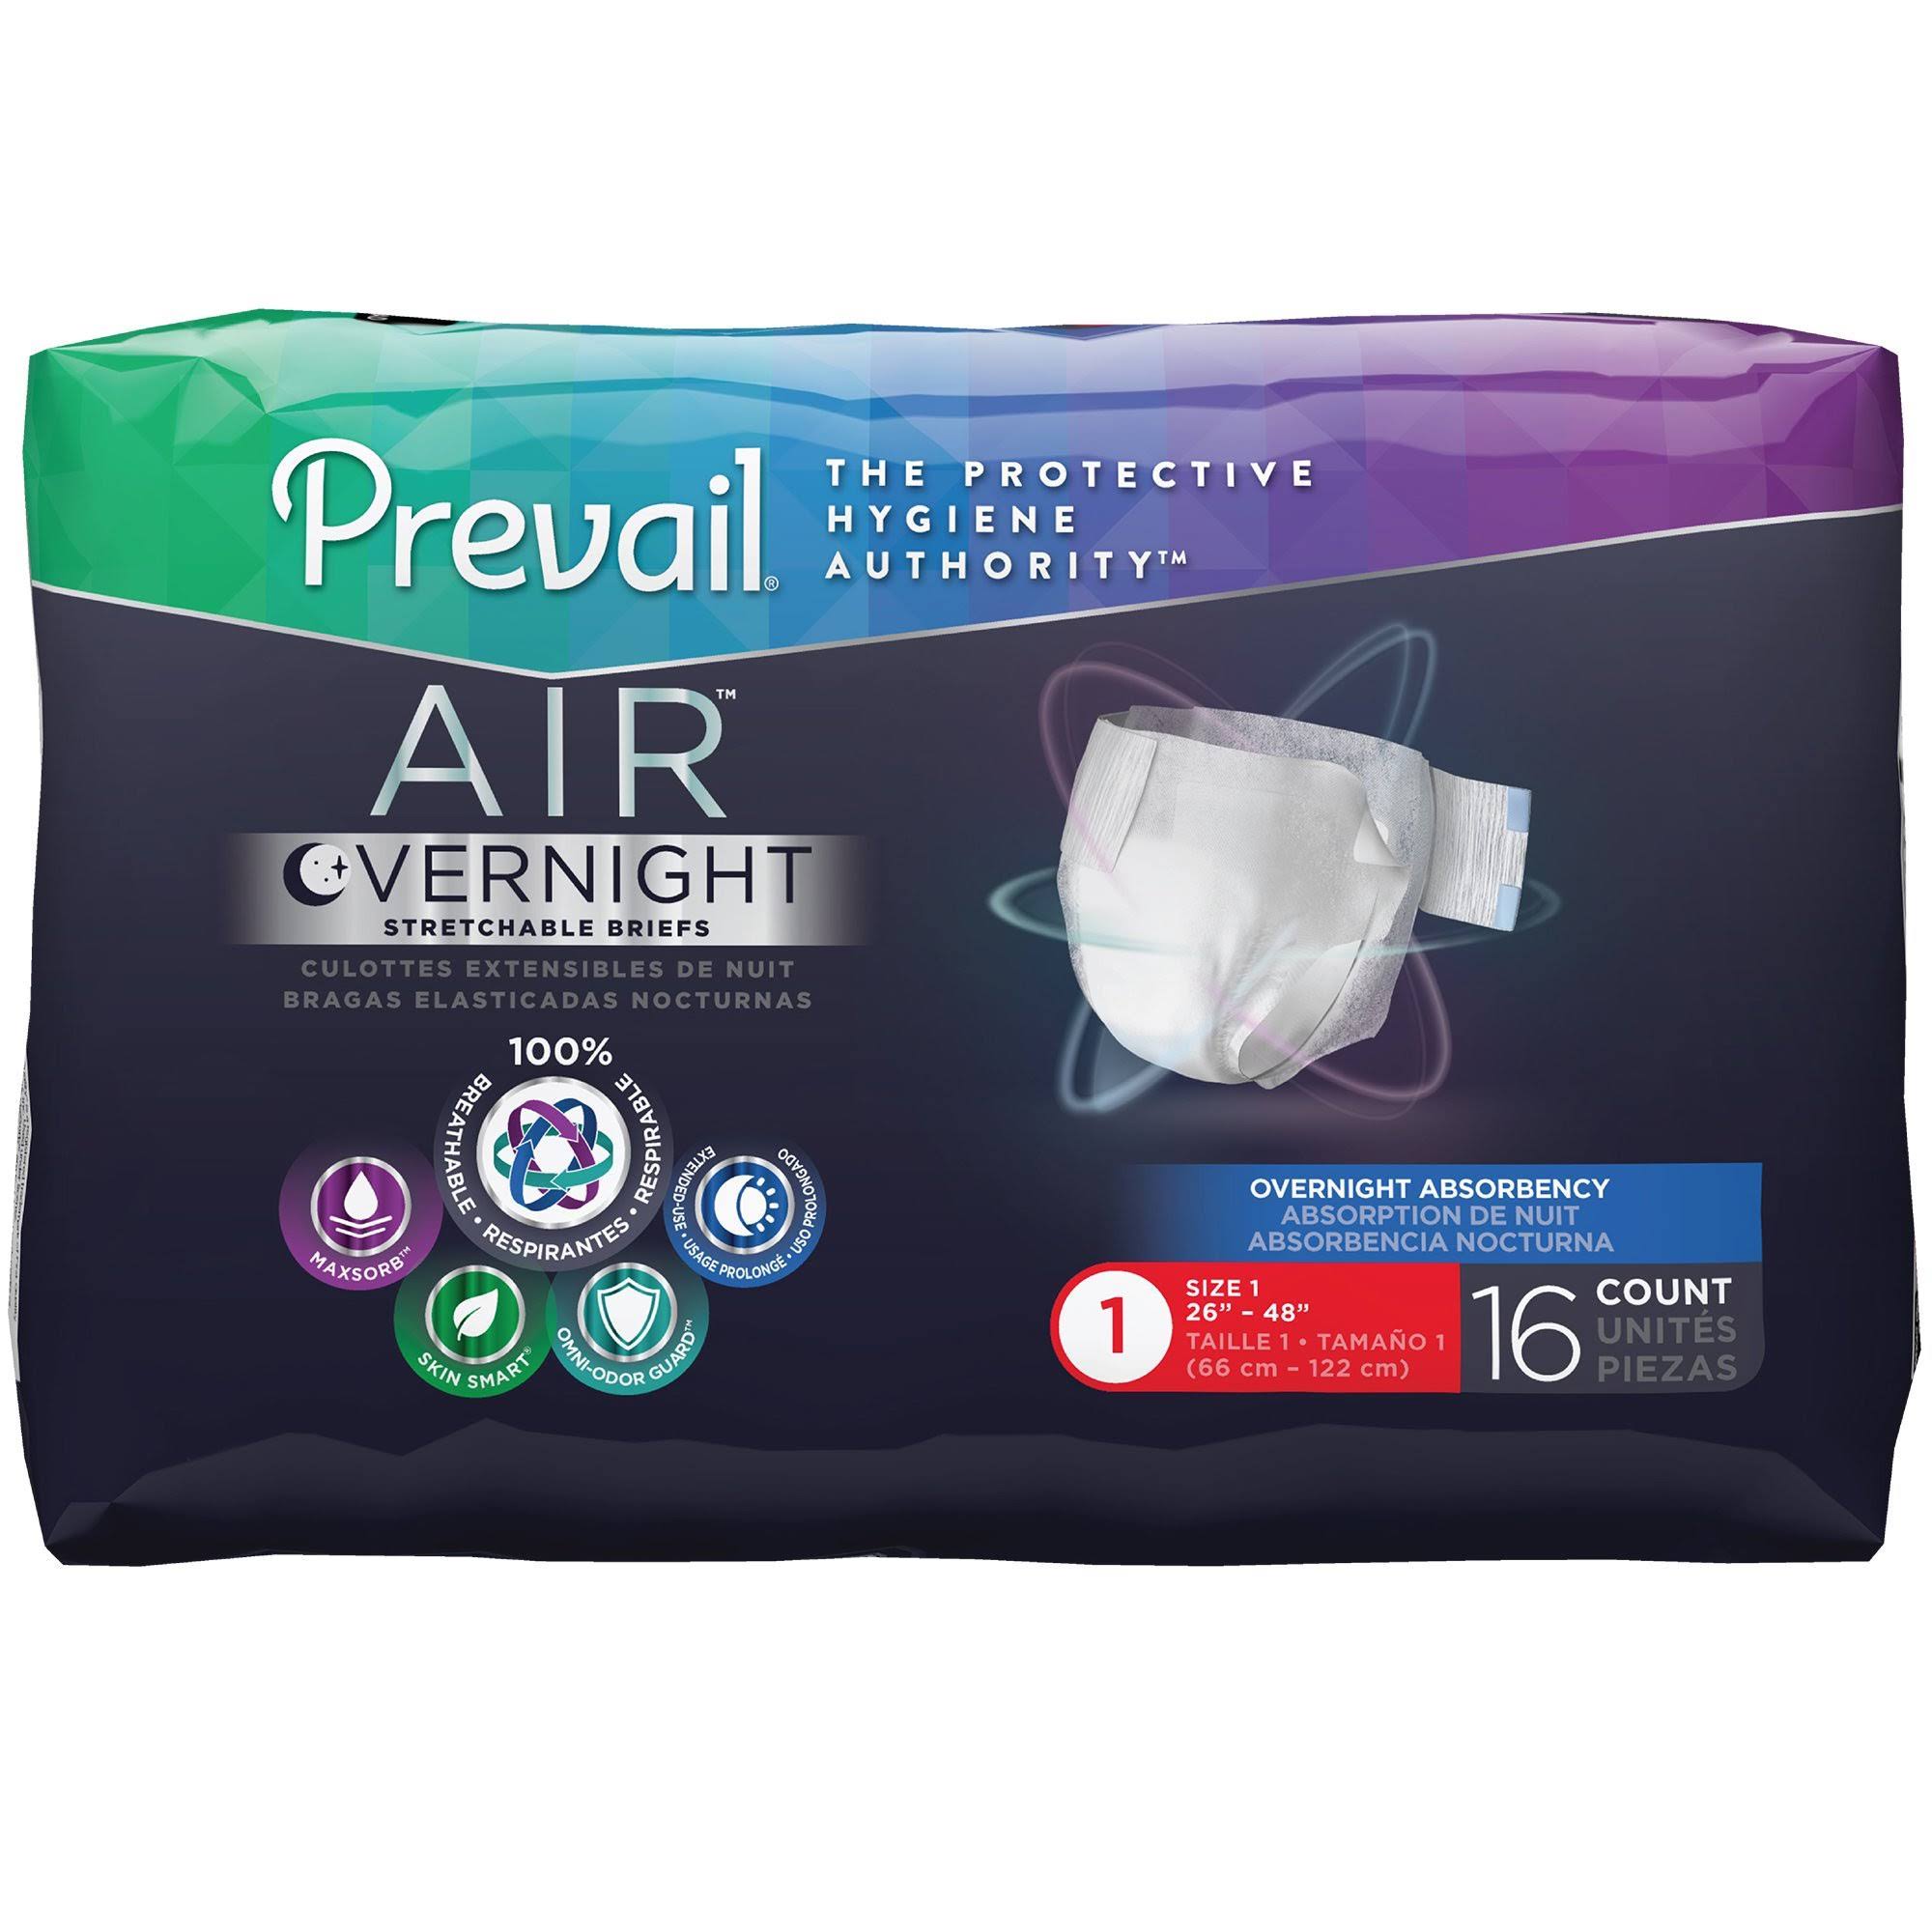 Prevail Air Overnight Incontinence Brief - Size 2 - Bag of 18